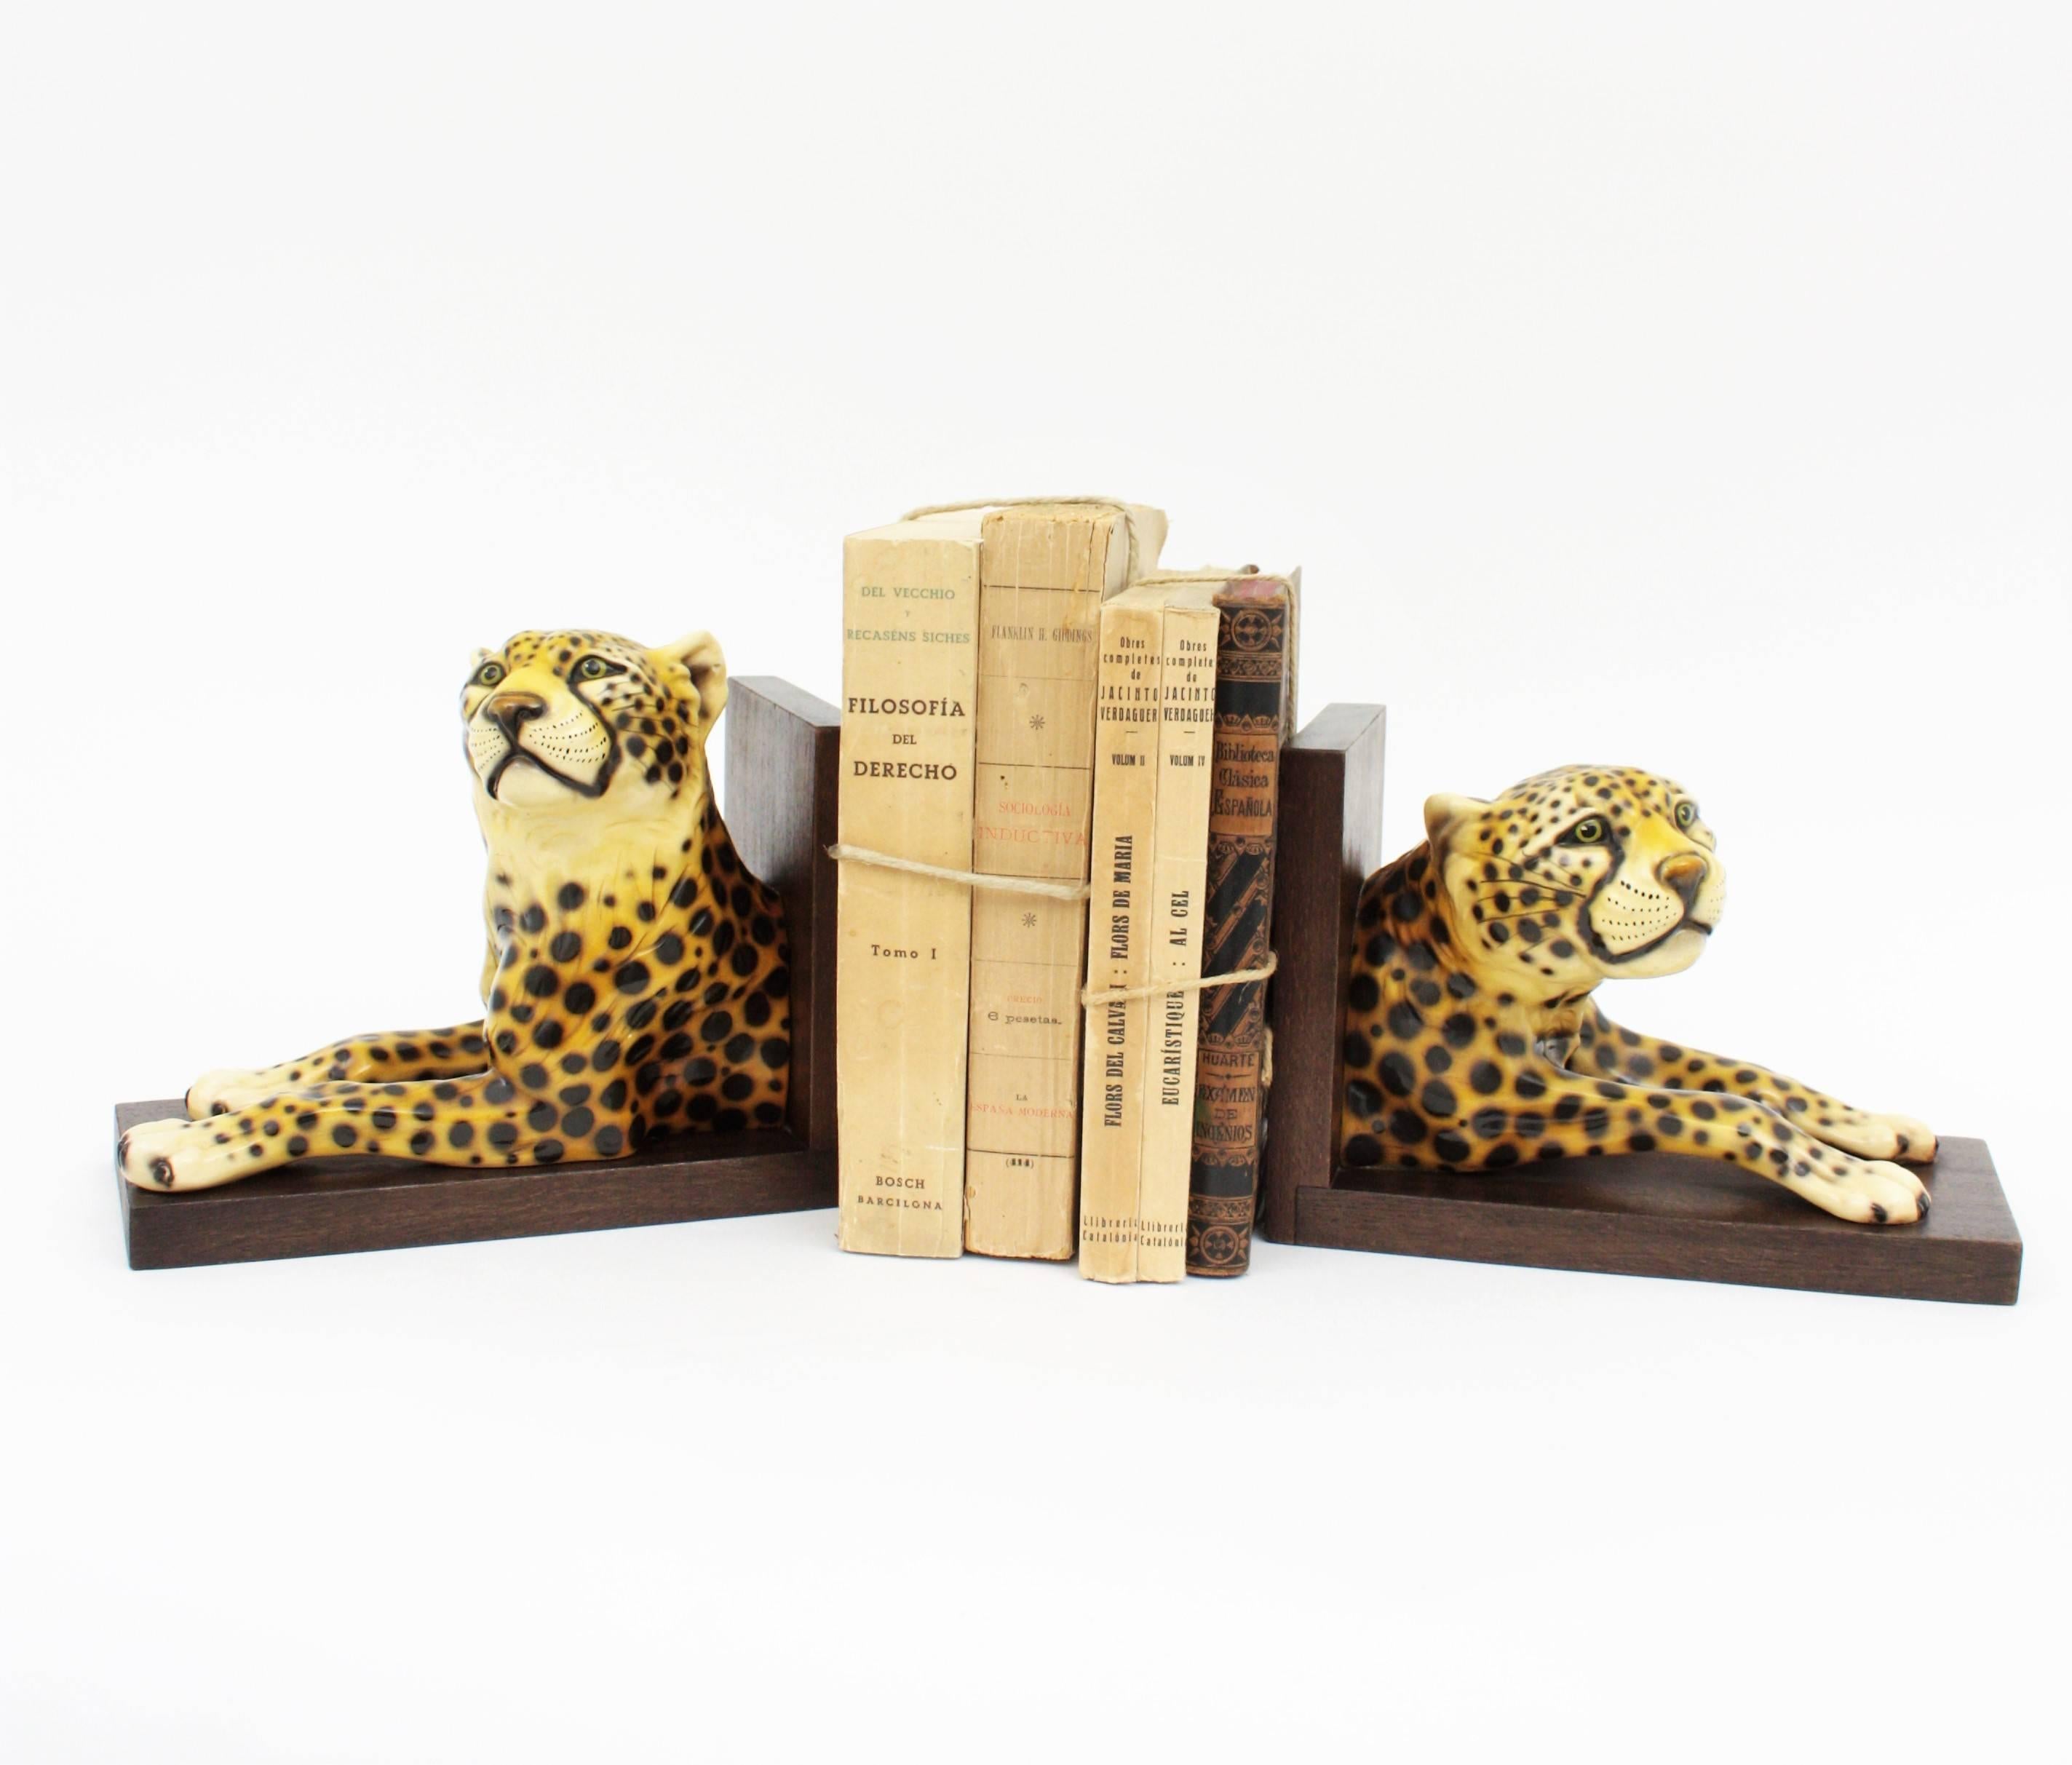 Pair of highly decorative hand painted ceramic cheetah bookends on wooden bases. Italy, 1950-1960.
Each bookend has a very realistic cheetah figure in different position.
This pair of book holders would be an interesting Midcentury accent in any